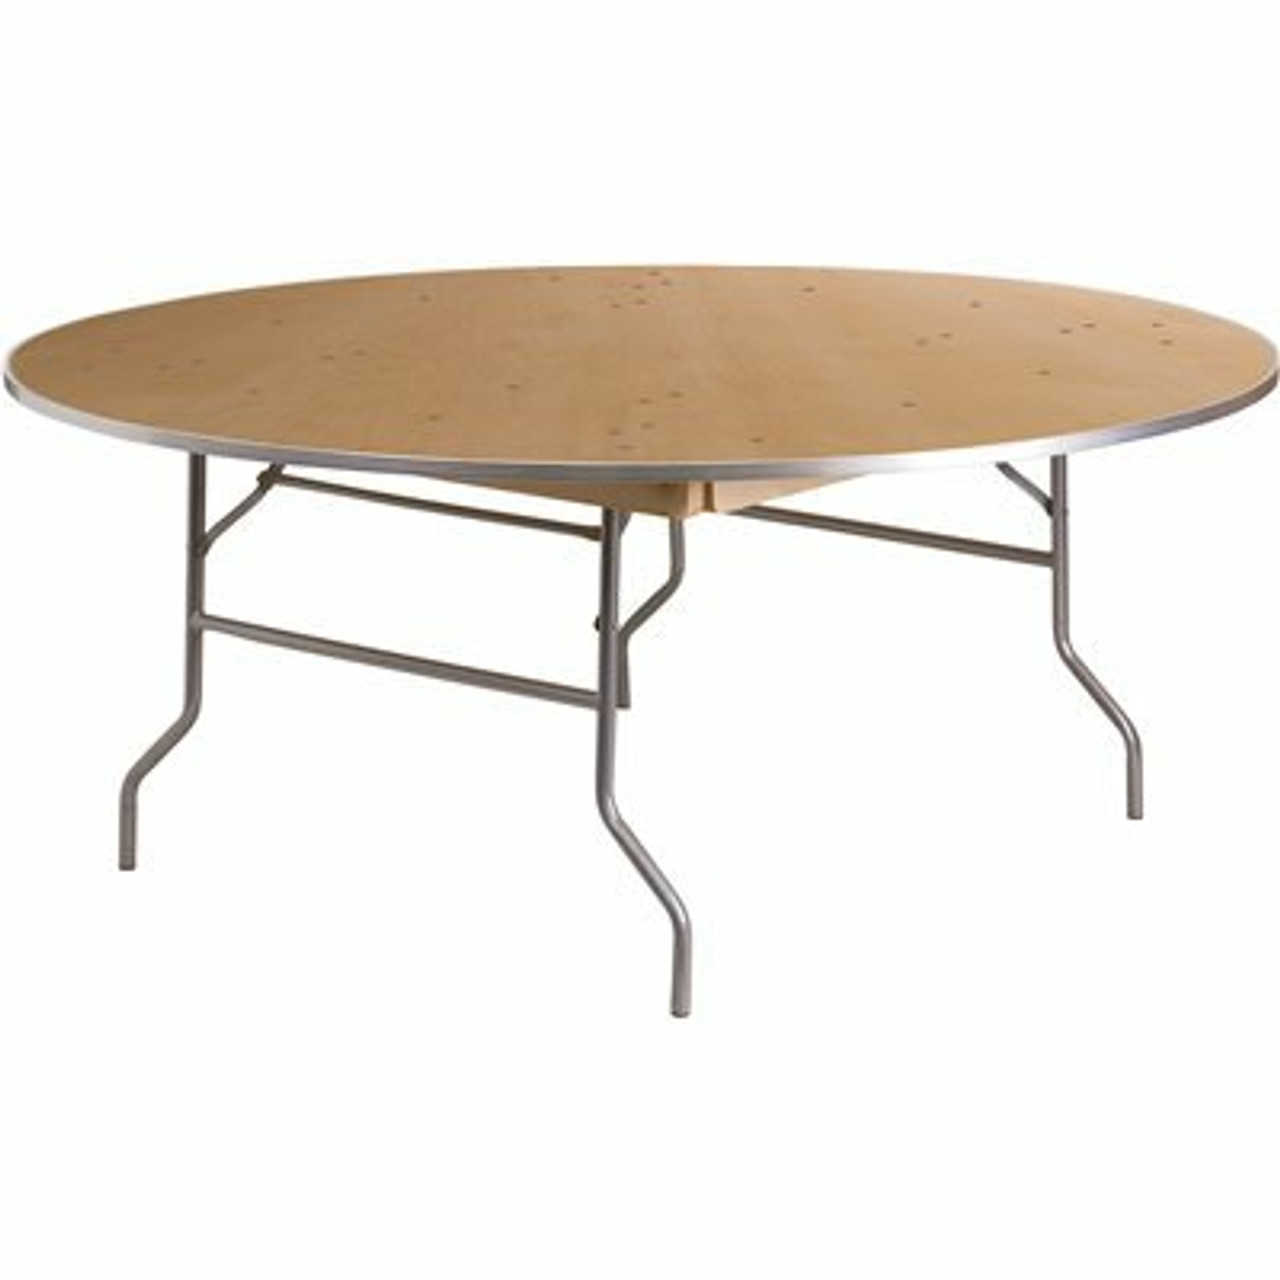 72 In. Natural Wood Tabletop Metal Frame Folding Table - 308688167